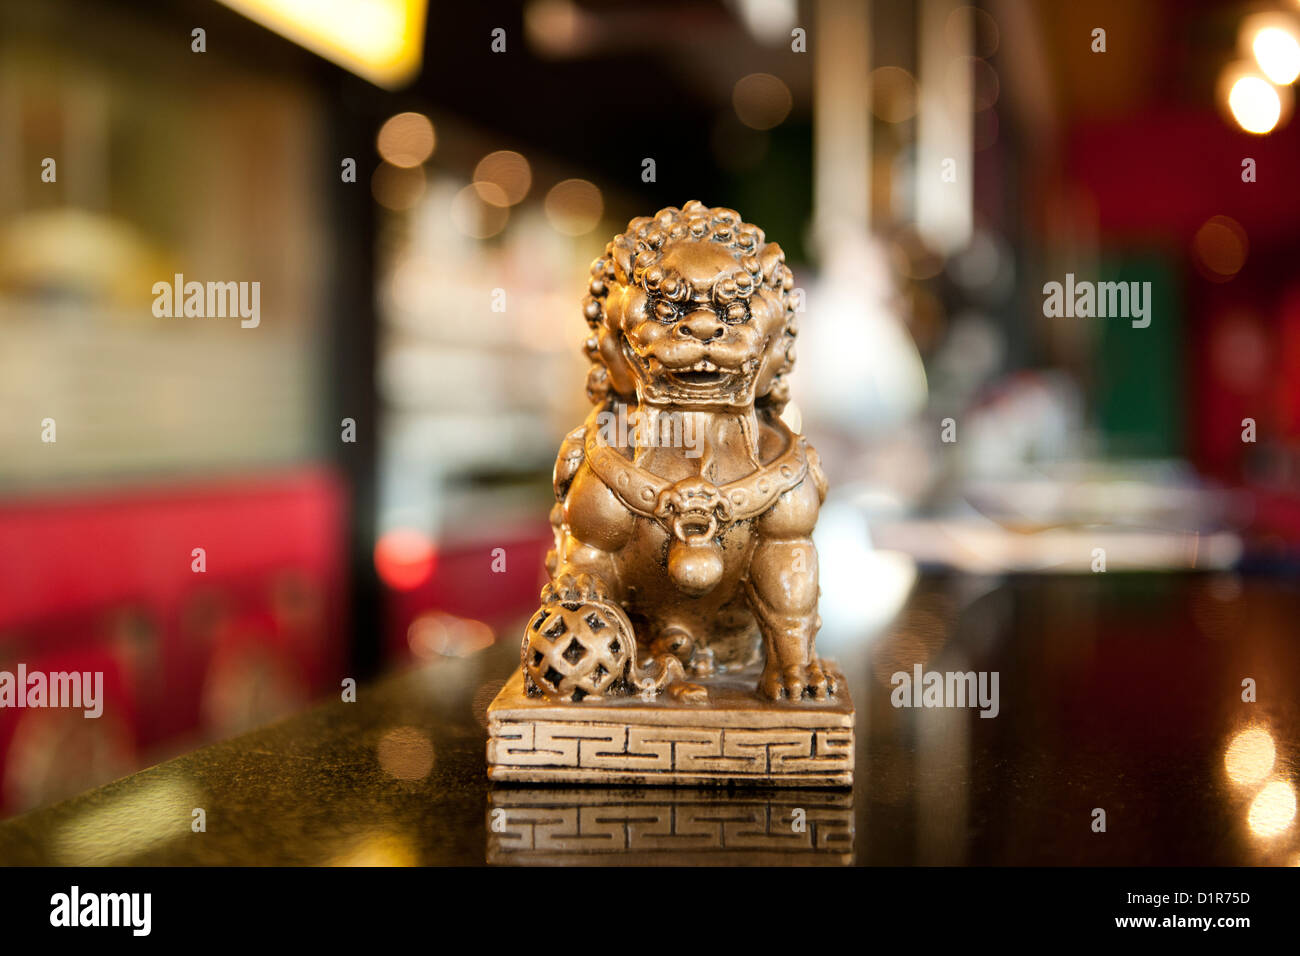 small chinese lion statue in a china restaurant Stock Photo